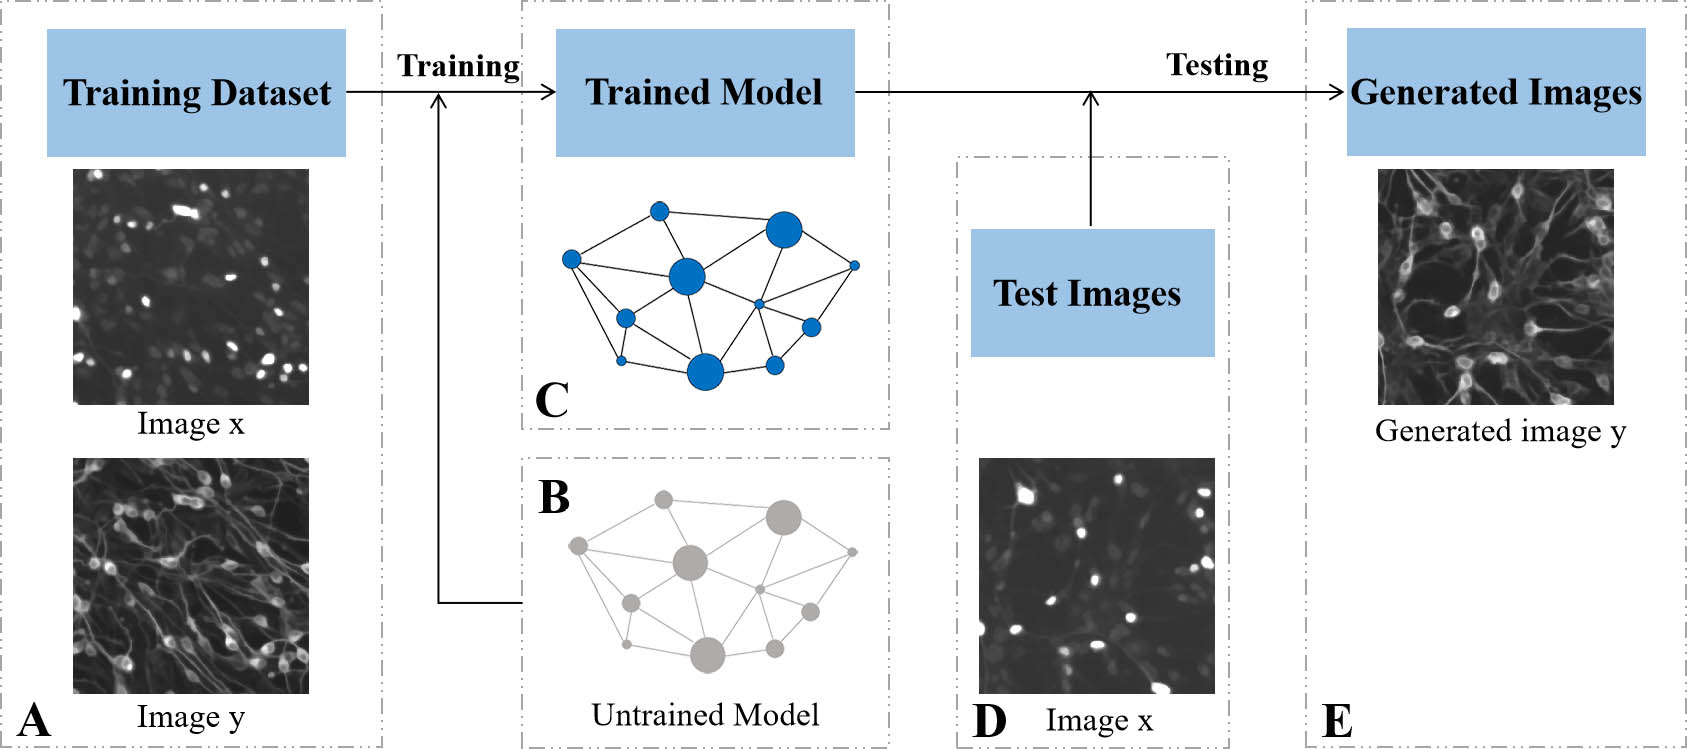 System for Fluo-Fluo translation based on cGAN. (A) The training dataset is composed of fluorescence images x and y in the same field of view. (B) A deep neural network is composed of untrained parameters. (C) The deep neural network trained with data in (A). (D) Test image. (E) Based on the trained deep learning model, the fluorescence image y is predicted from the fluorescence image x.